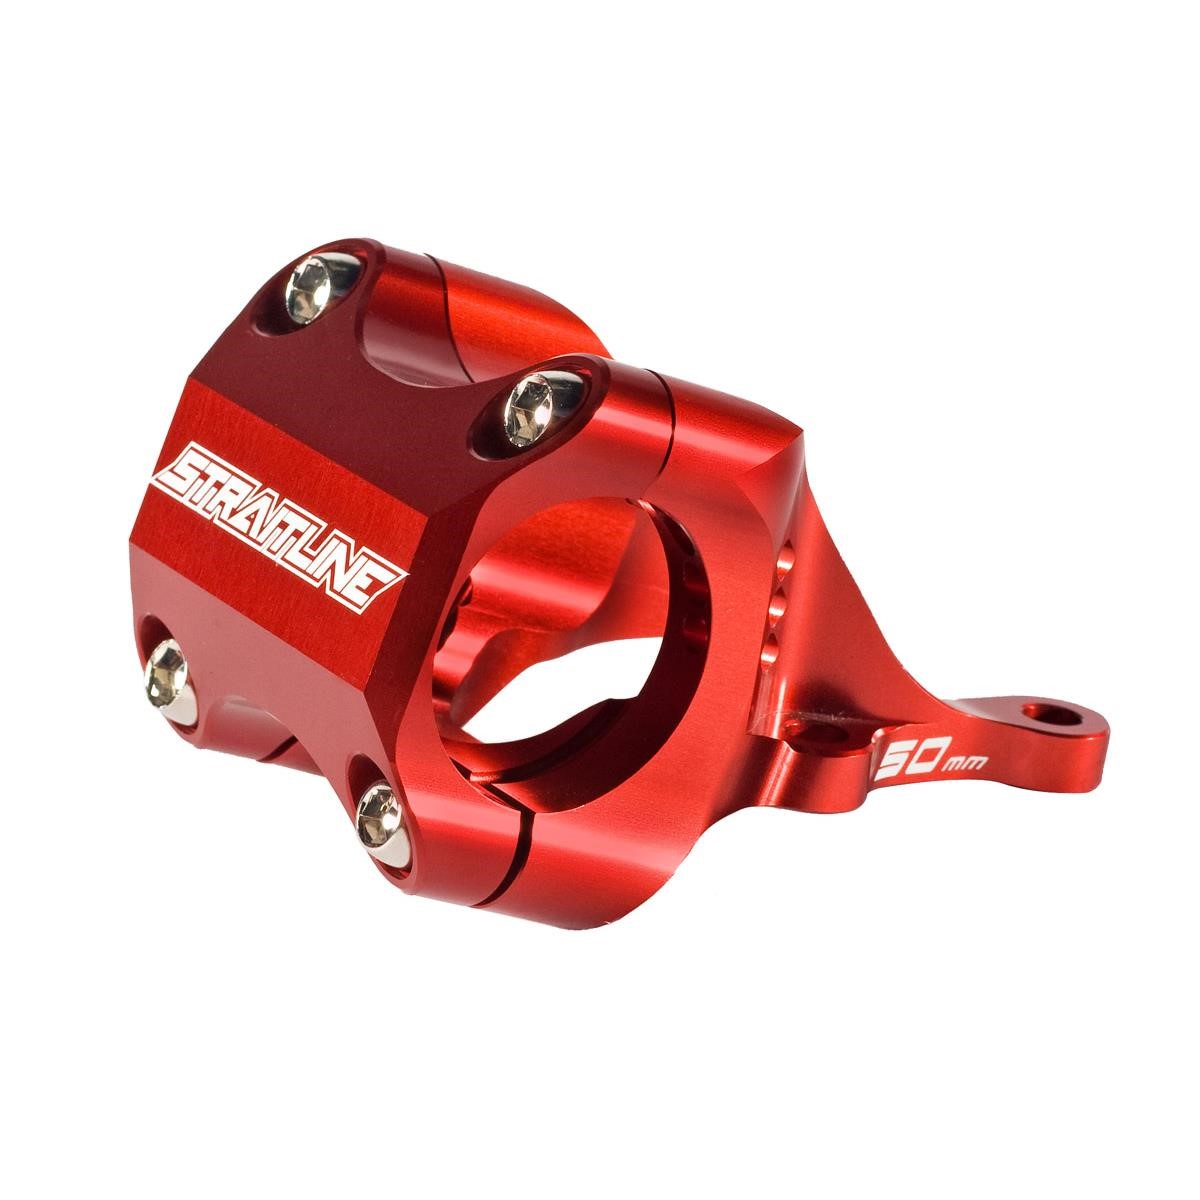 Straitline Components Potence VTT Boxxer Ultra Red, 31.8 mm, 50 mm